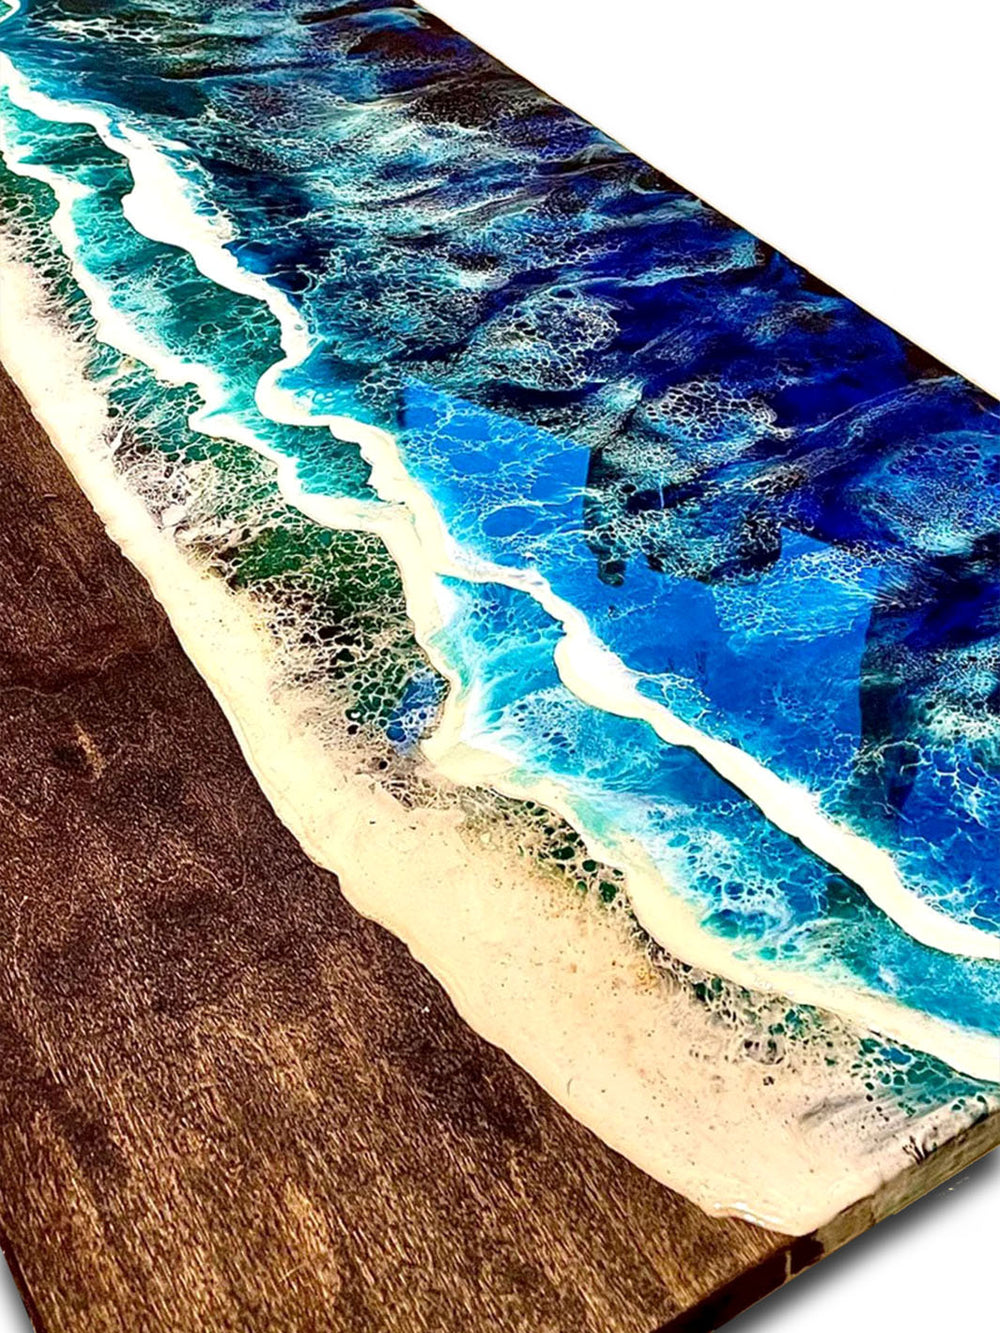 Handcrafted Beach Inspired Elongated Epoxy Resin Dining Table 84" L x 42" W Artsheedal Tables ART0161-1